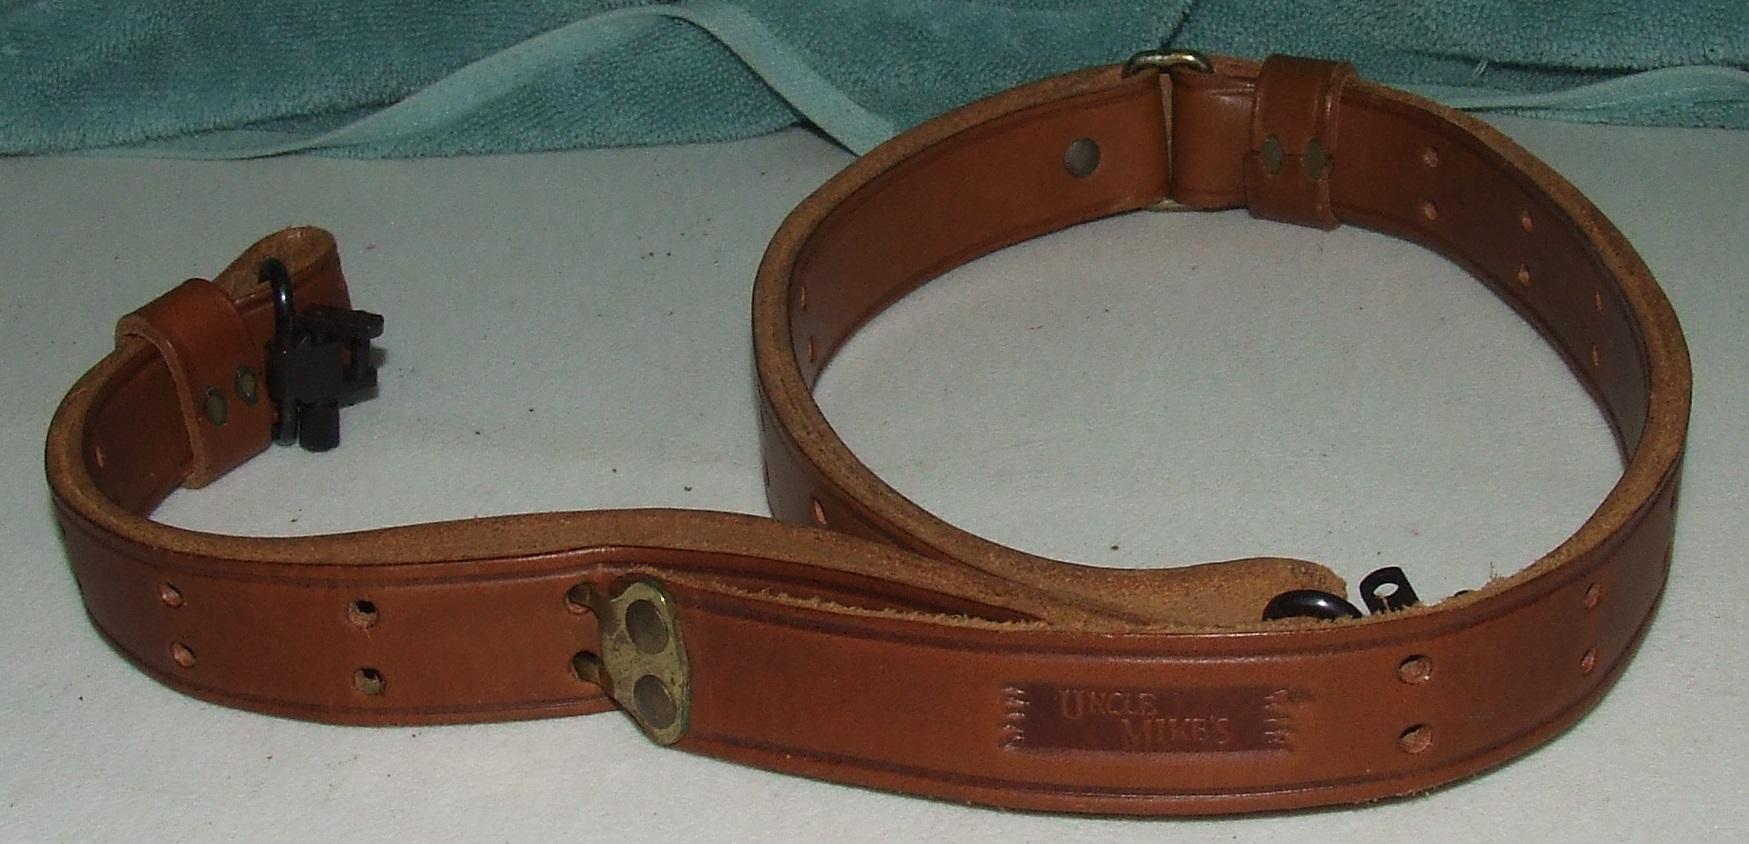 Uncle Mike's Leather Rifle Sling